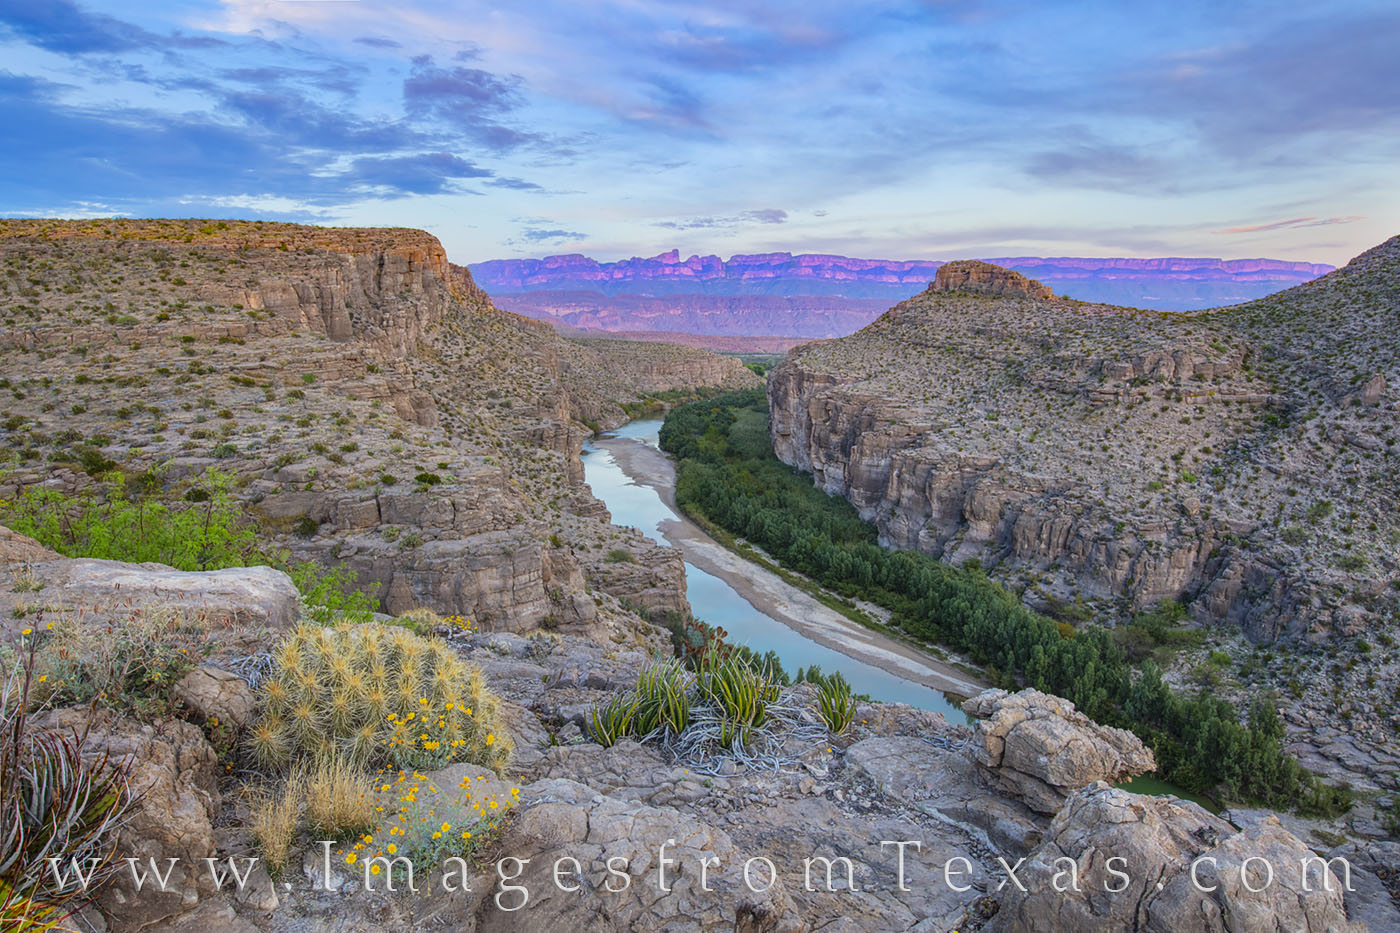 The Hot Springs Trail in Big Bend National Park offers amazing views of both the Rio Grande far below and the distant mountains...